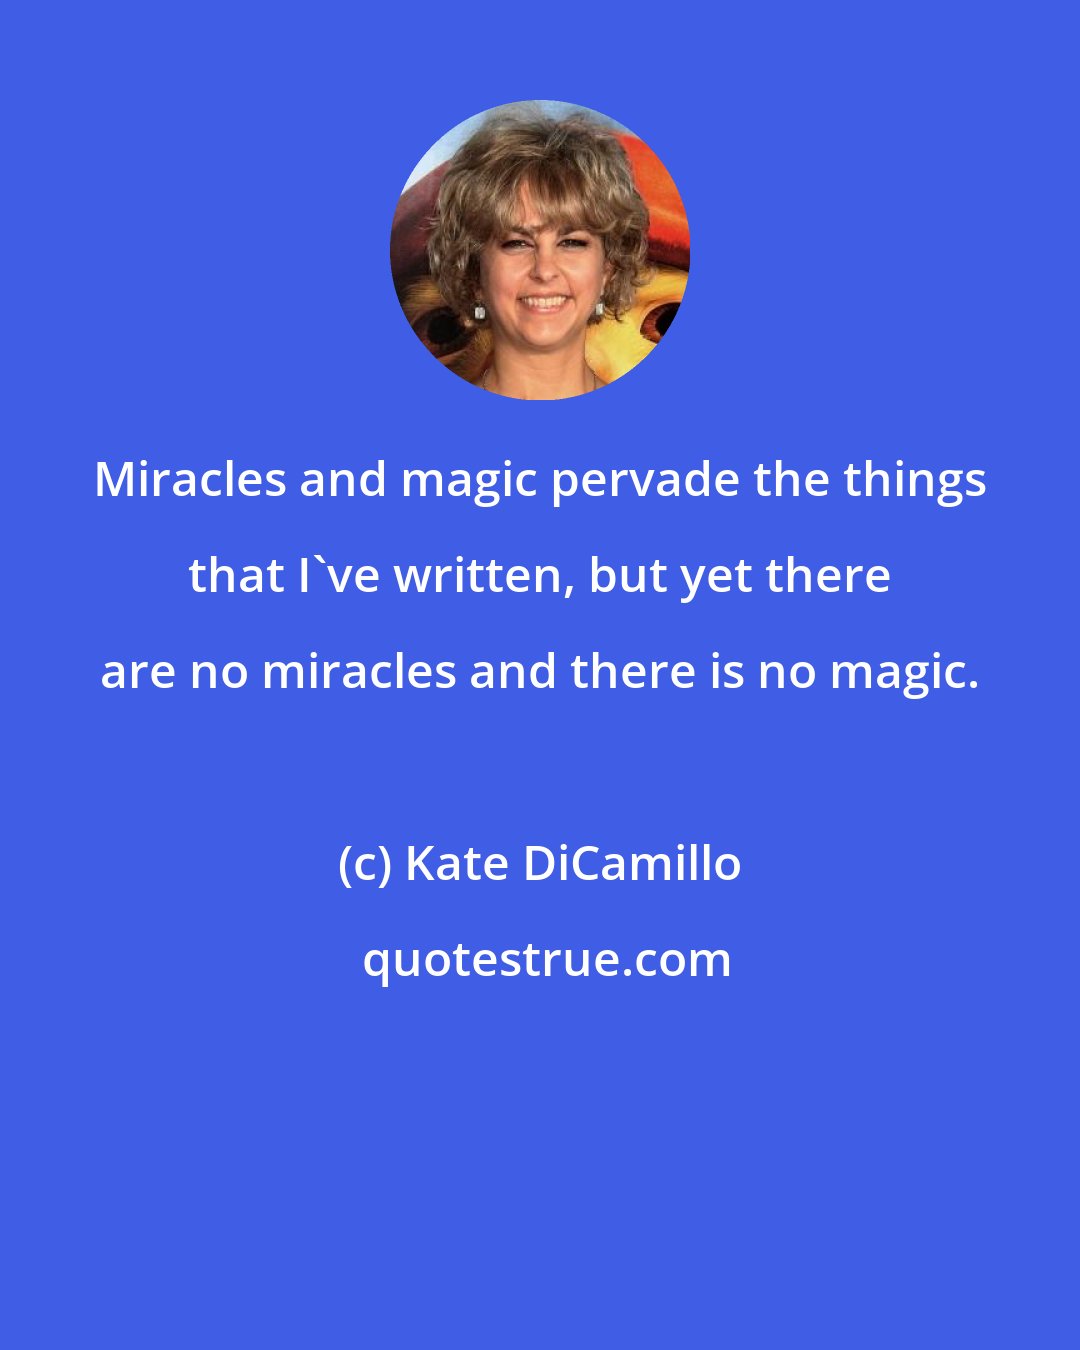 Kate DiCamillo: Miracles and magic pervade the things that I've written, but yet there are no miracles and there is no magic.